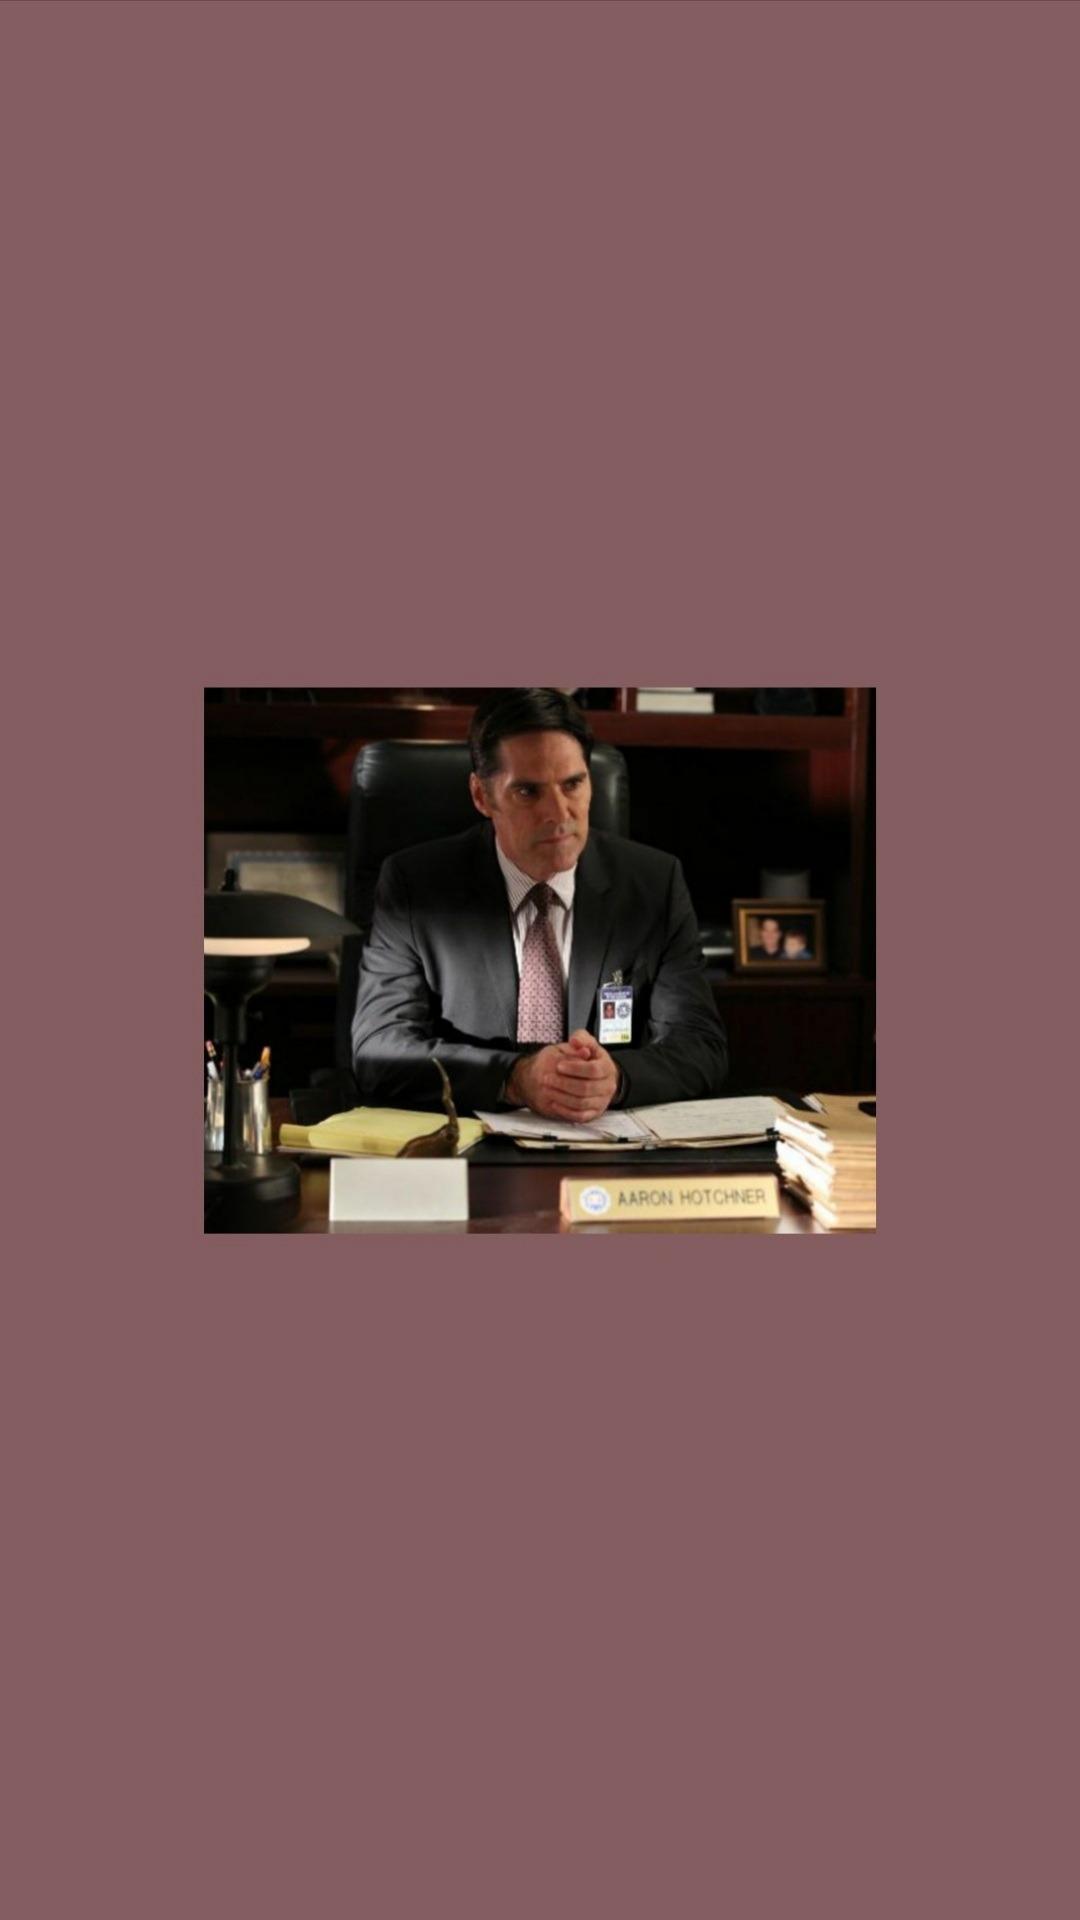 Aaron Hotchner Wallpapers - Top Free Aaron Hotchner Backgrounds ...